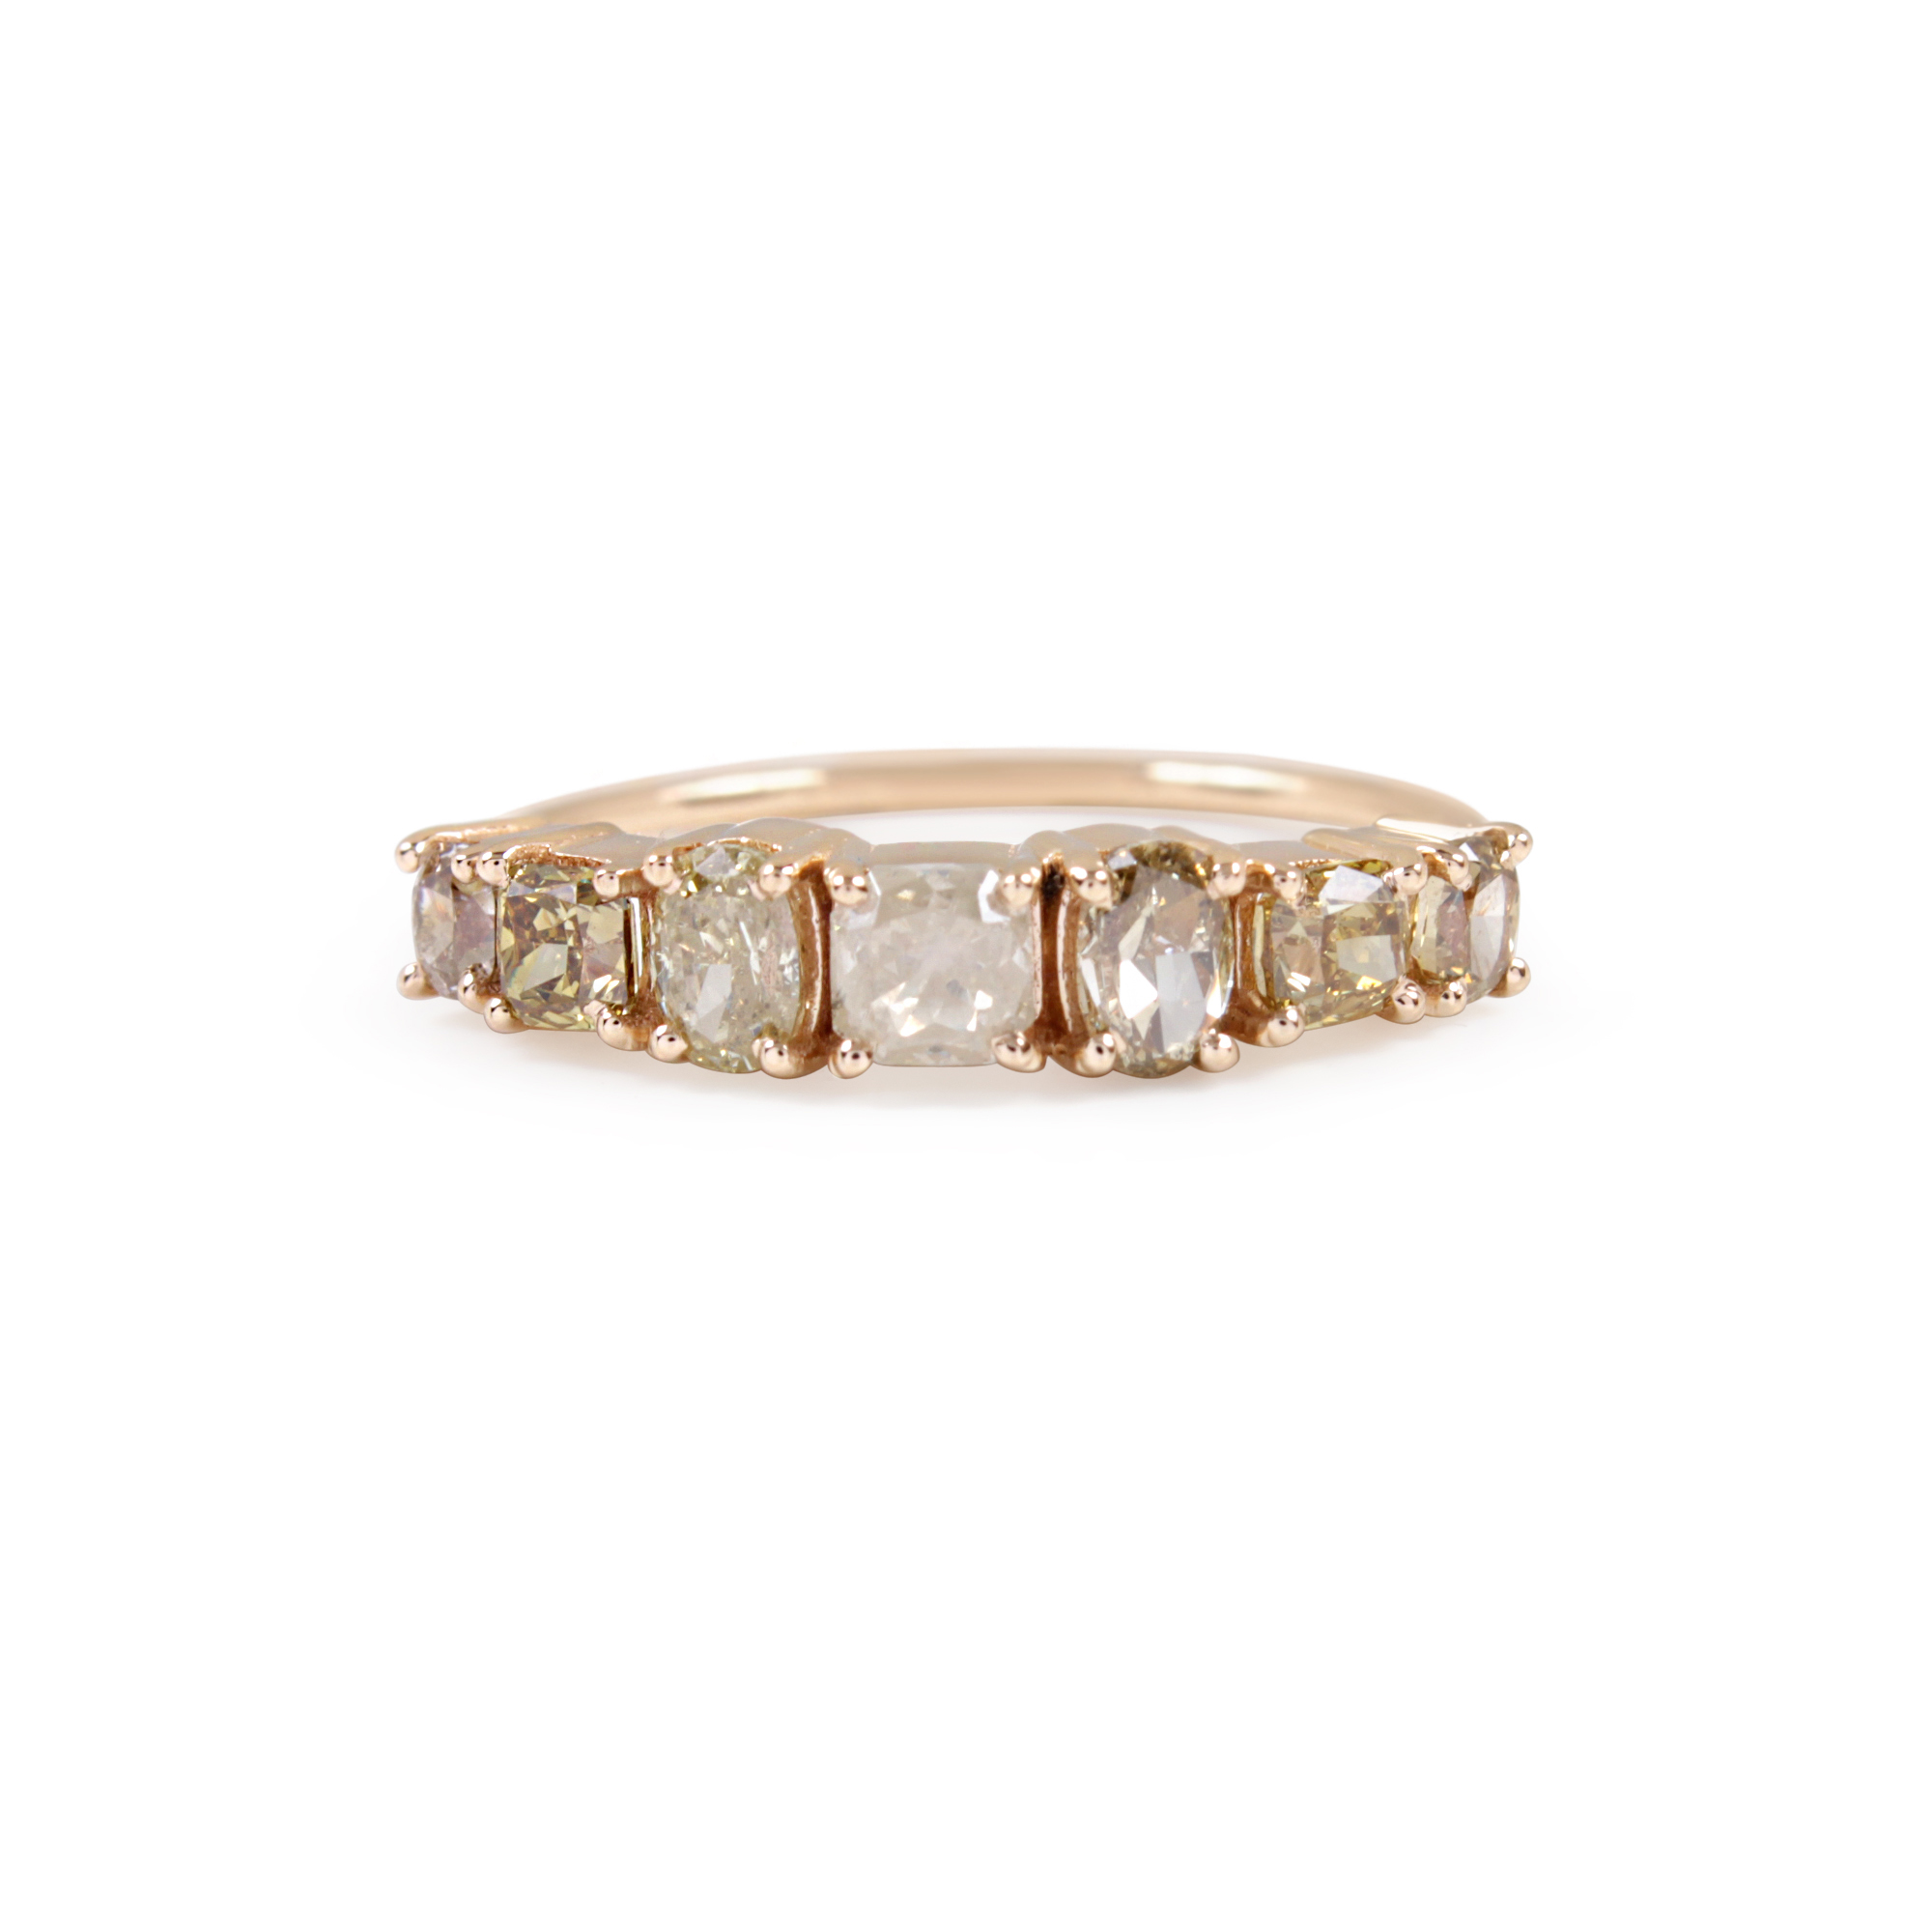 Pave Diamond 14K Solid Gold Ring Fine Jewelry